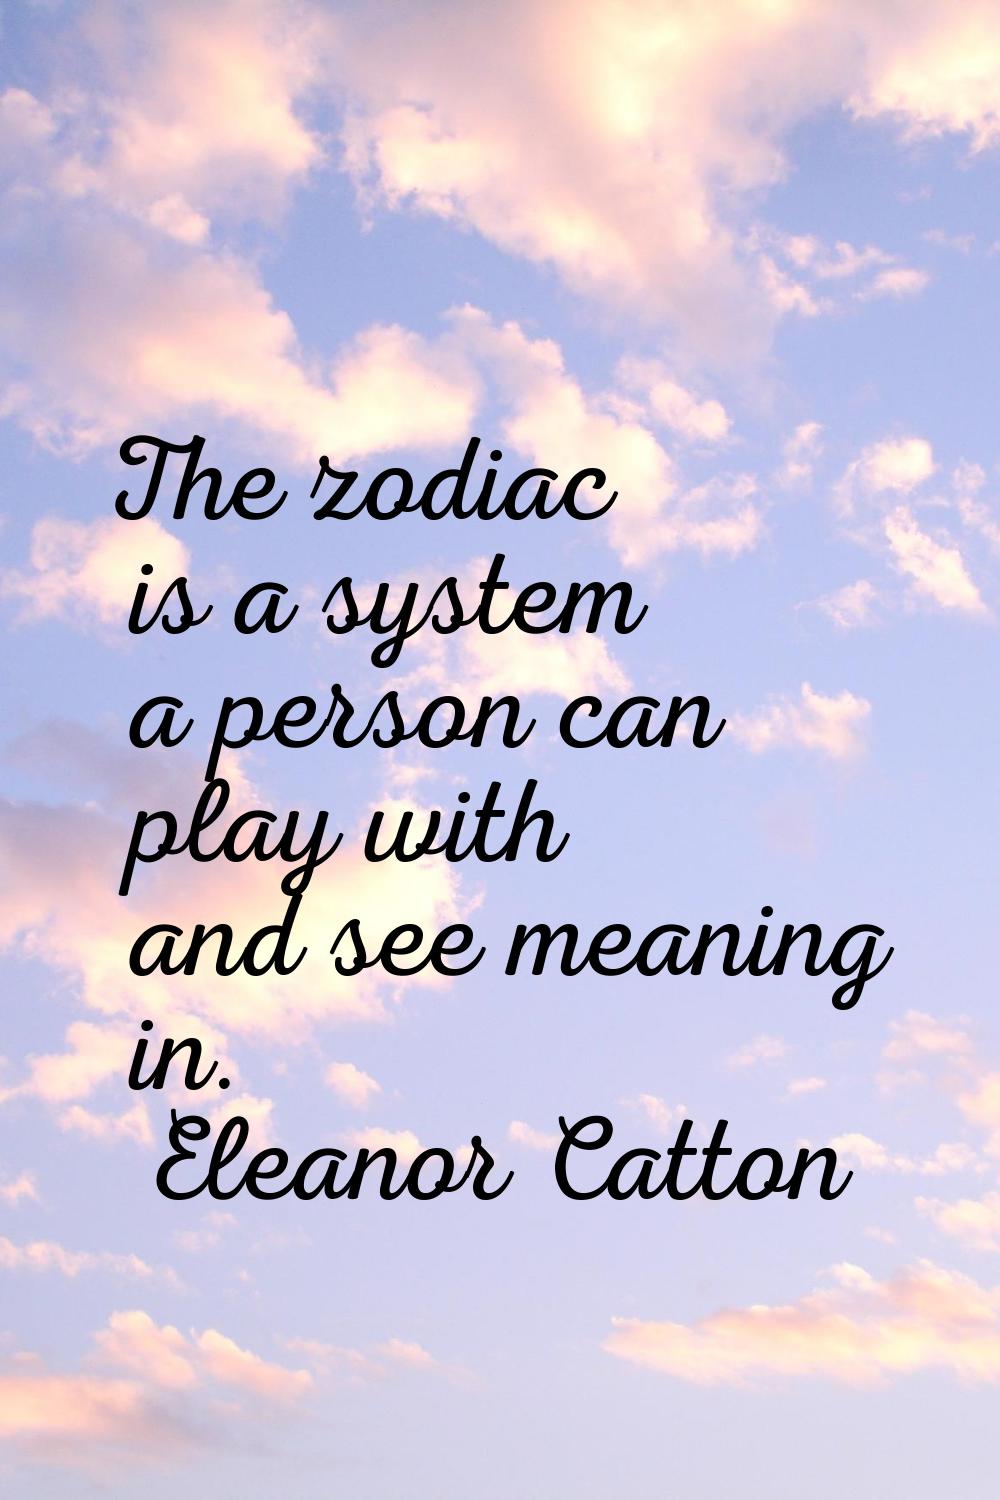 The zodiac is a system a person can play with and see meaning in.